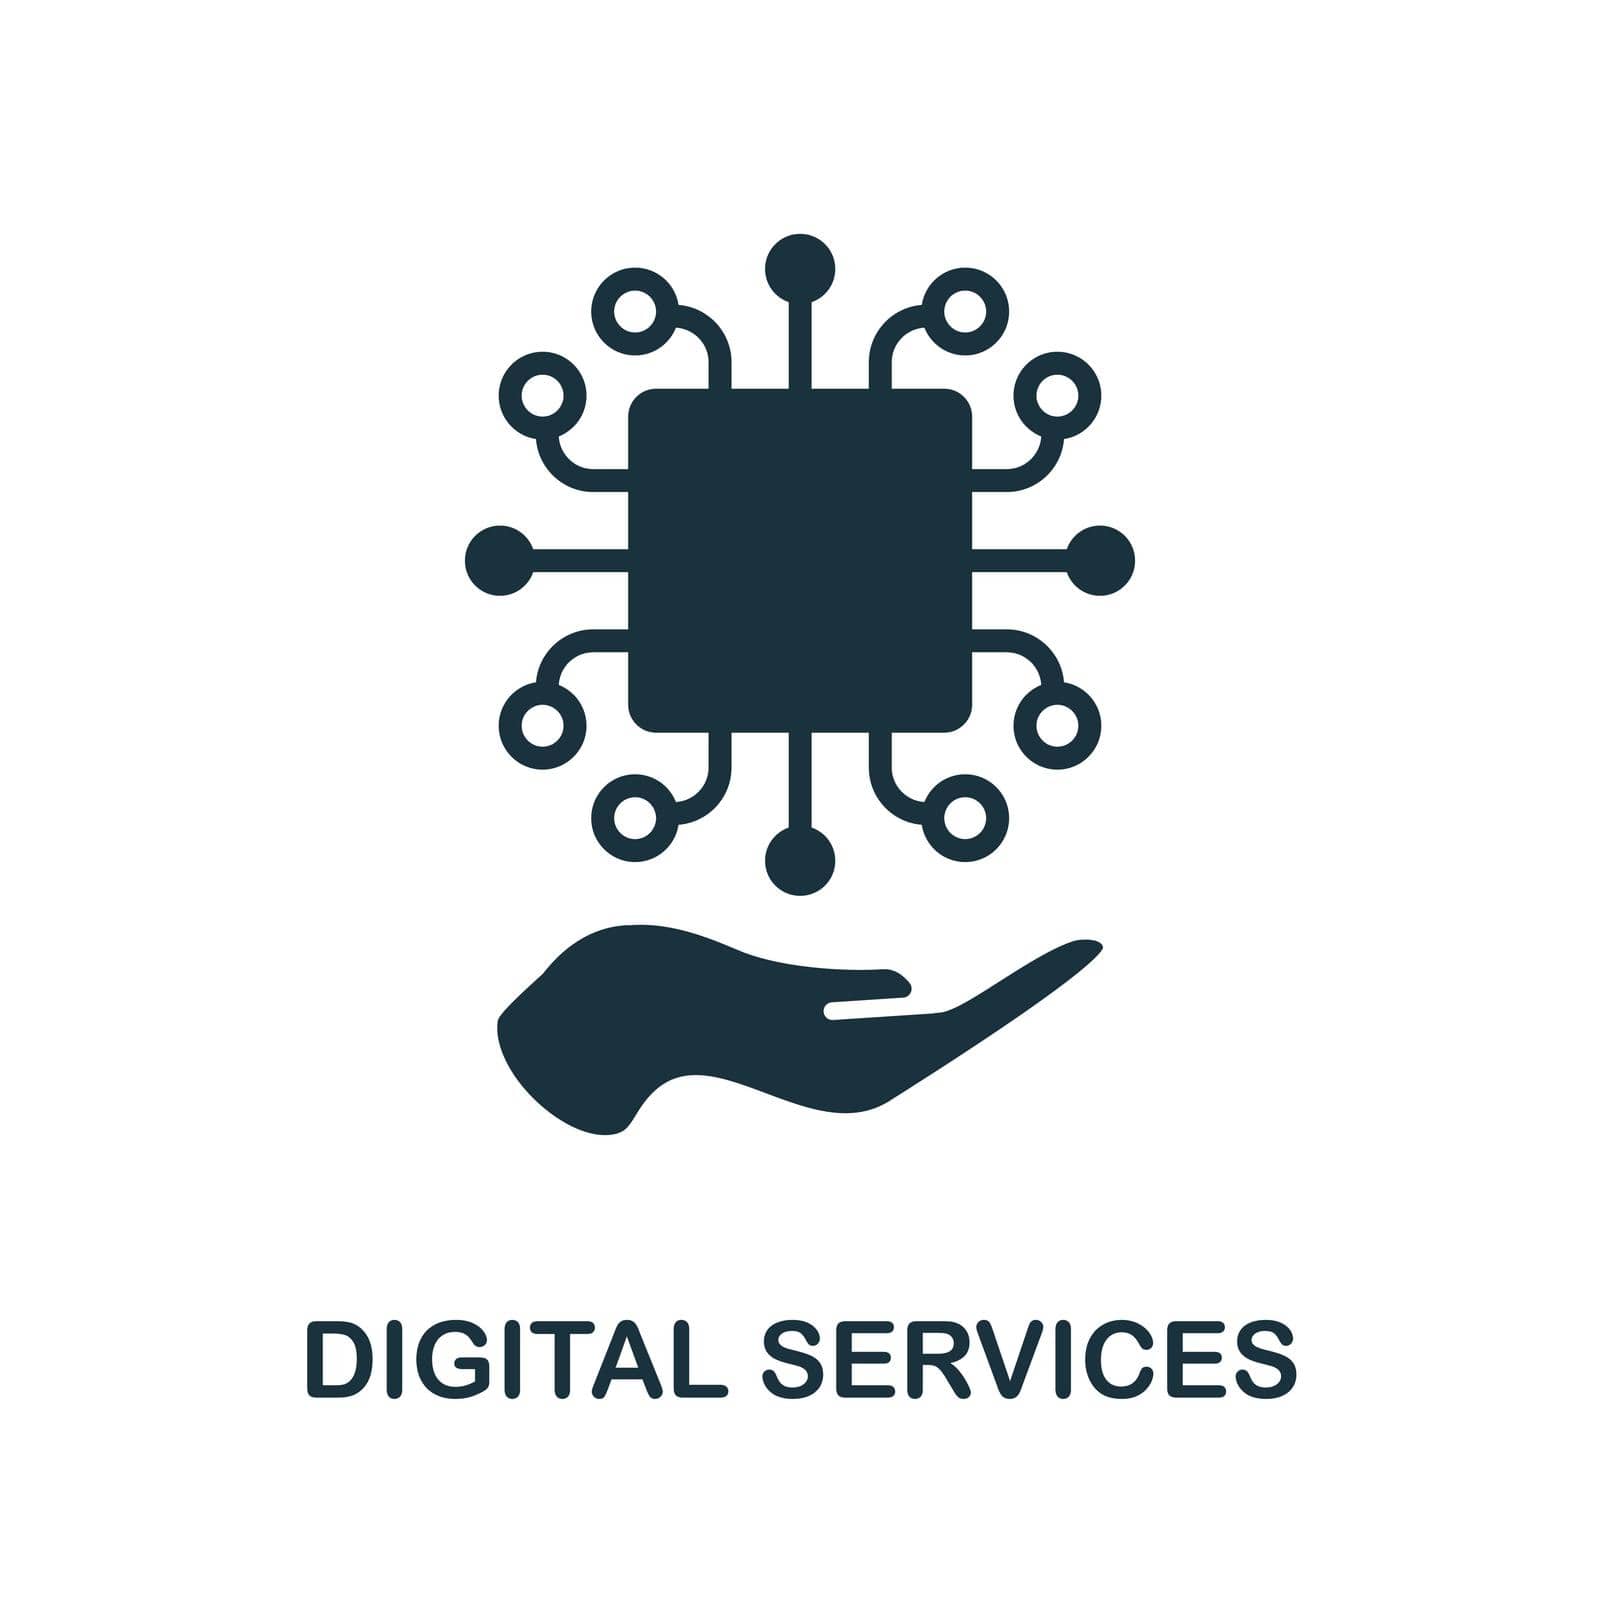 Digital Services icon. Simple line element digital services symbol for templates, web design and infographics.